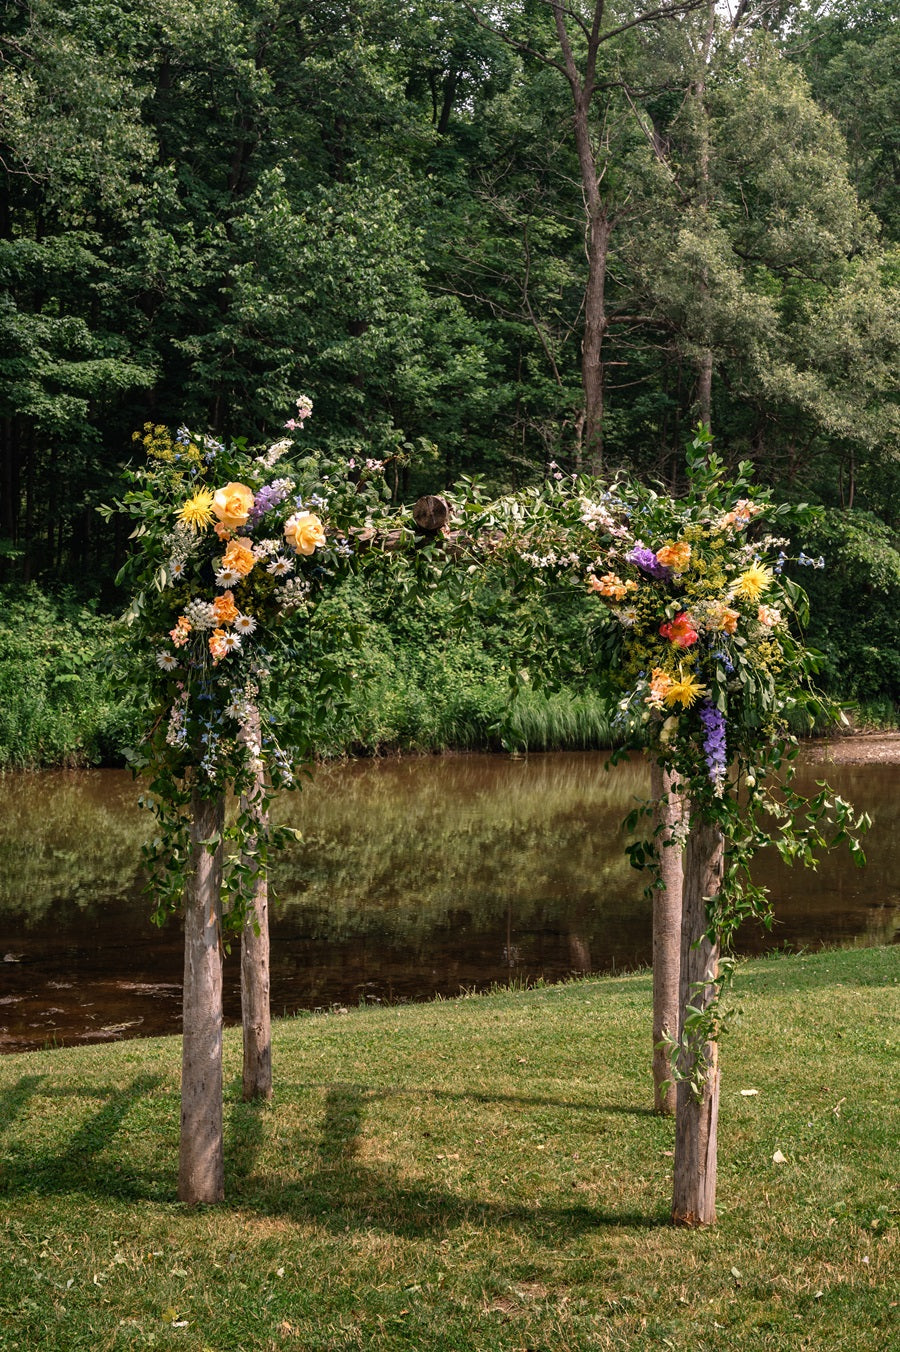 An arch stands along a forest and a river. It has a natural feel, full of greenery and florals. The florals shown are yellow, orange, purple, and pink, with blue accents.